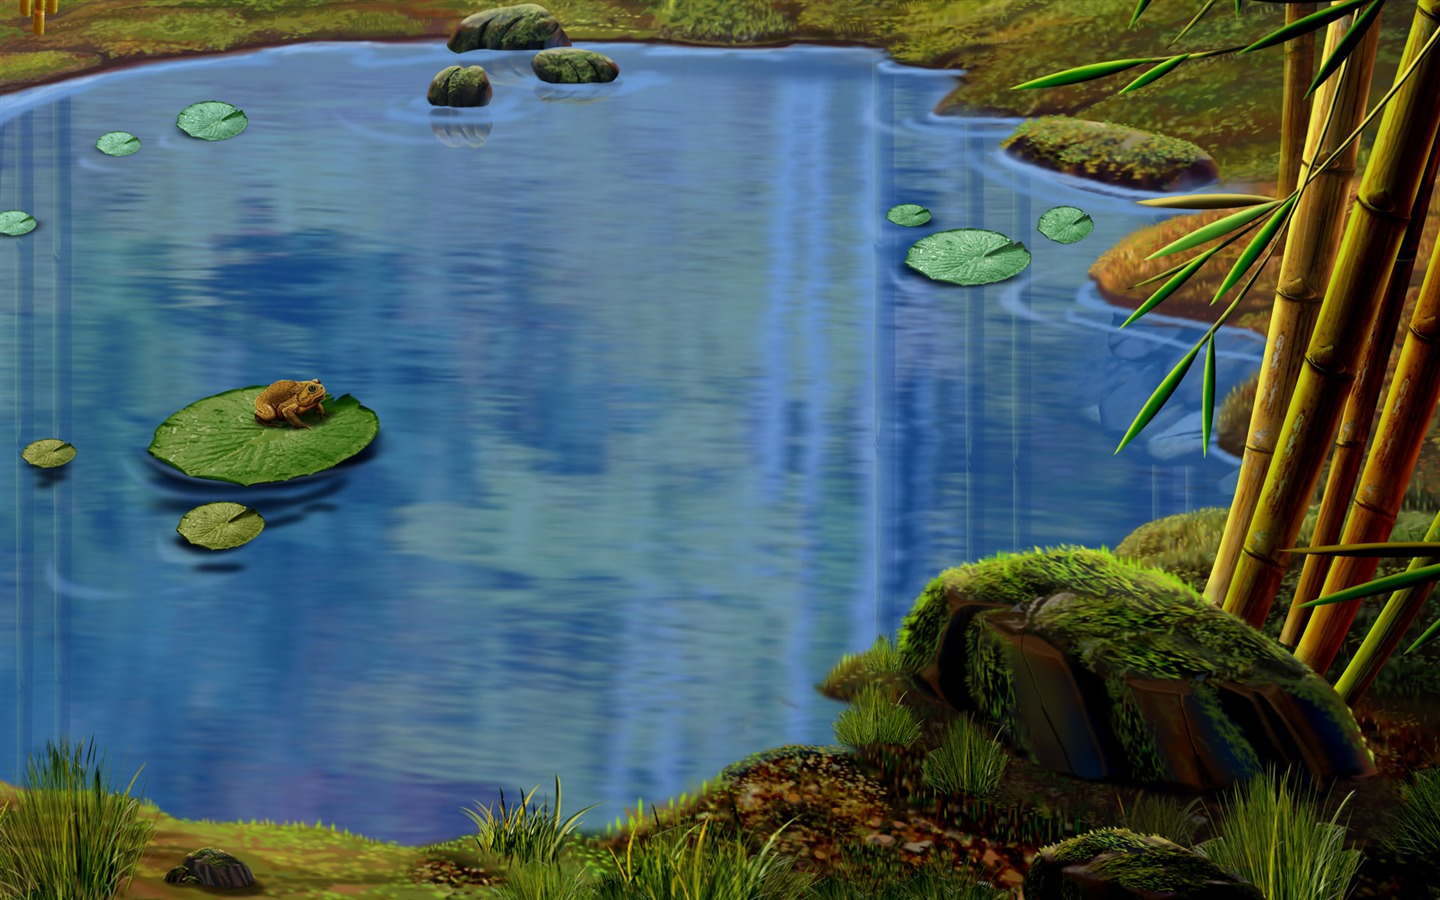 Colorful hand-painted wallpaper landscape ecology (1) #7 - 1440x900